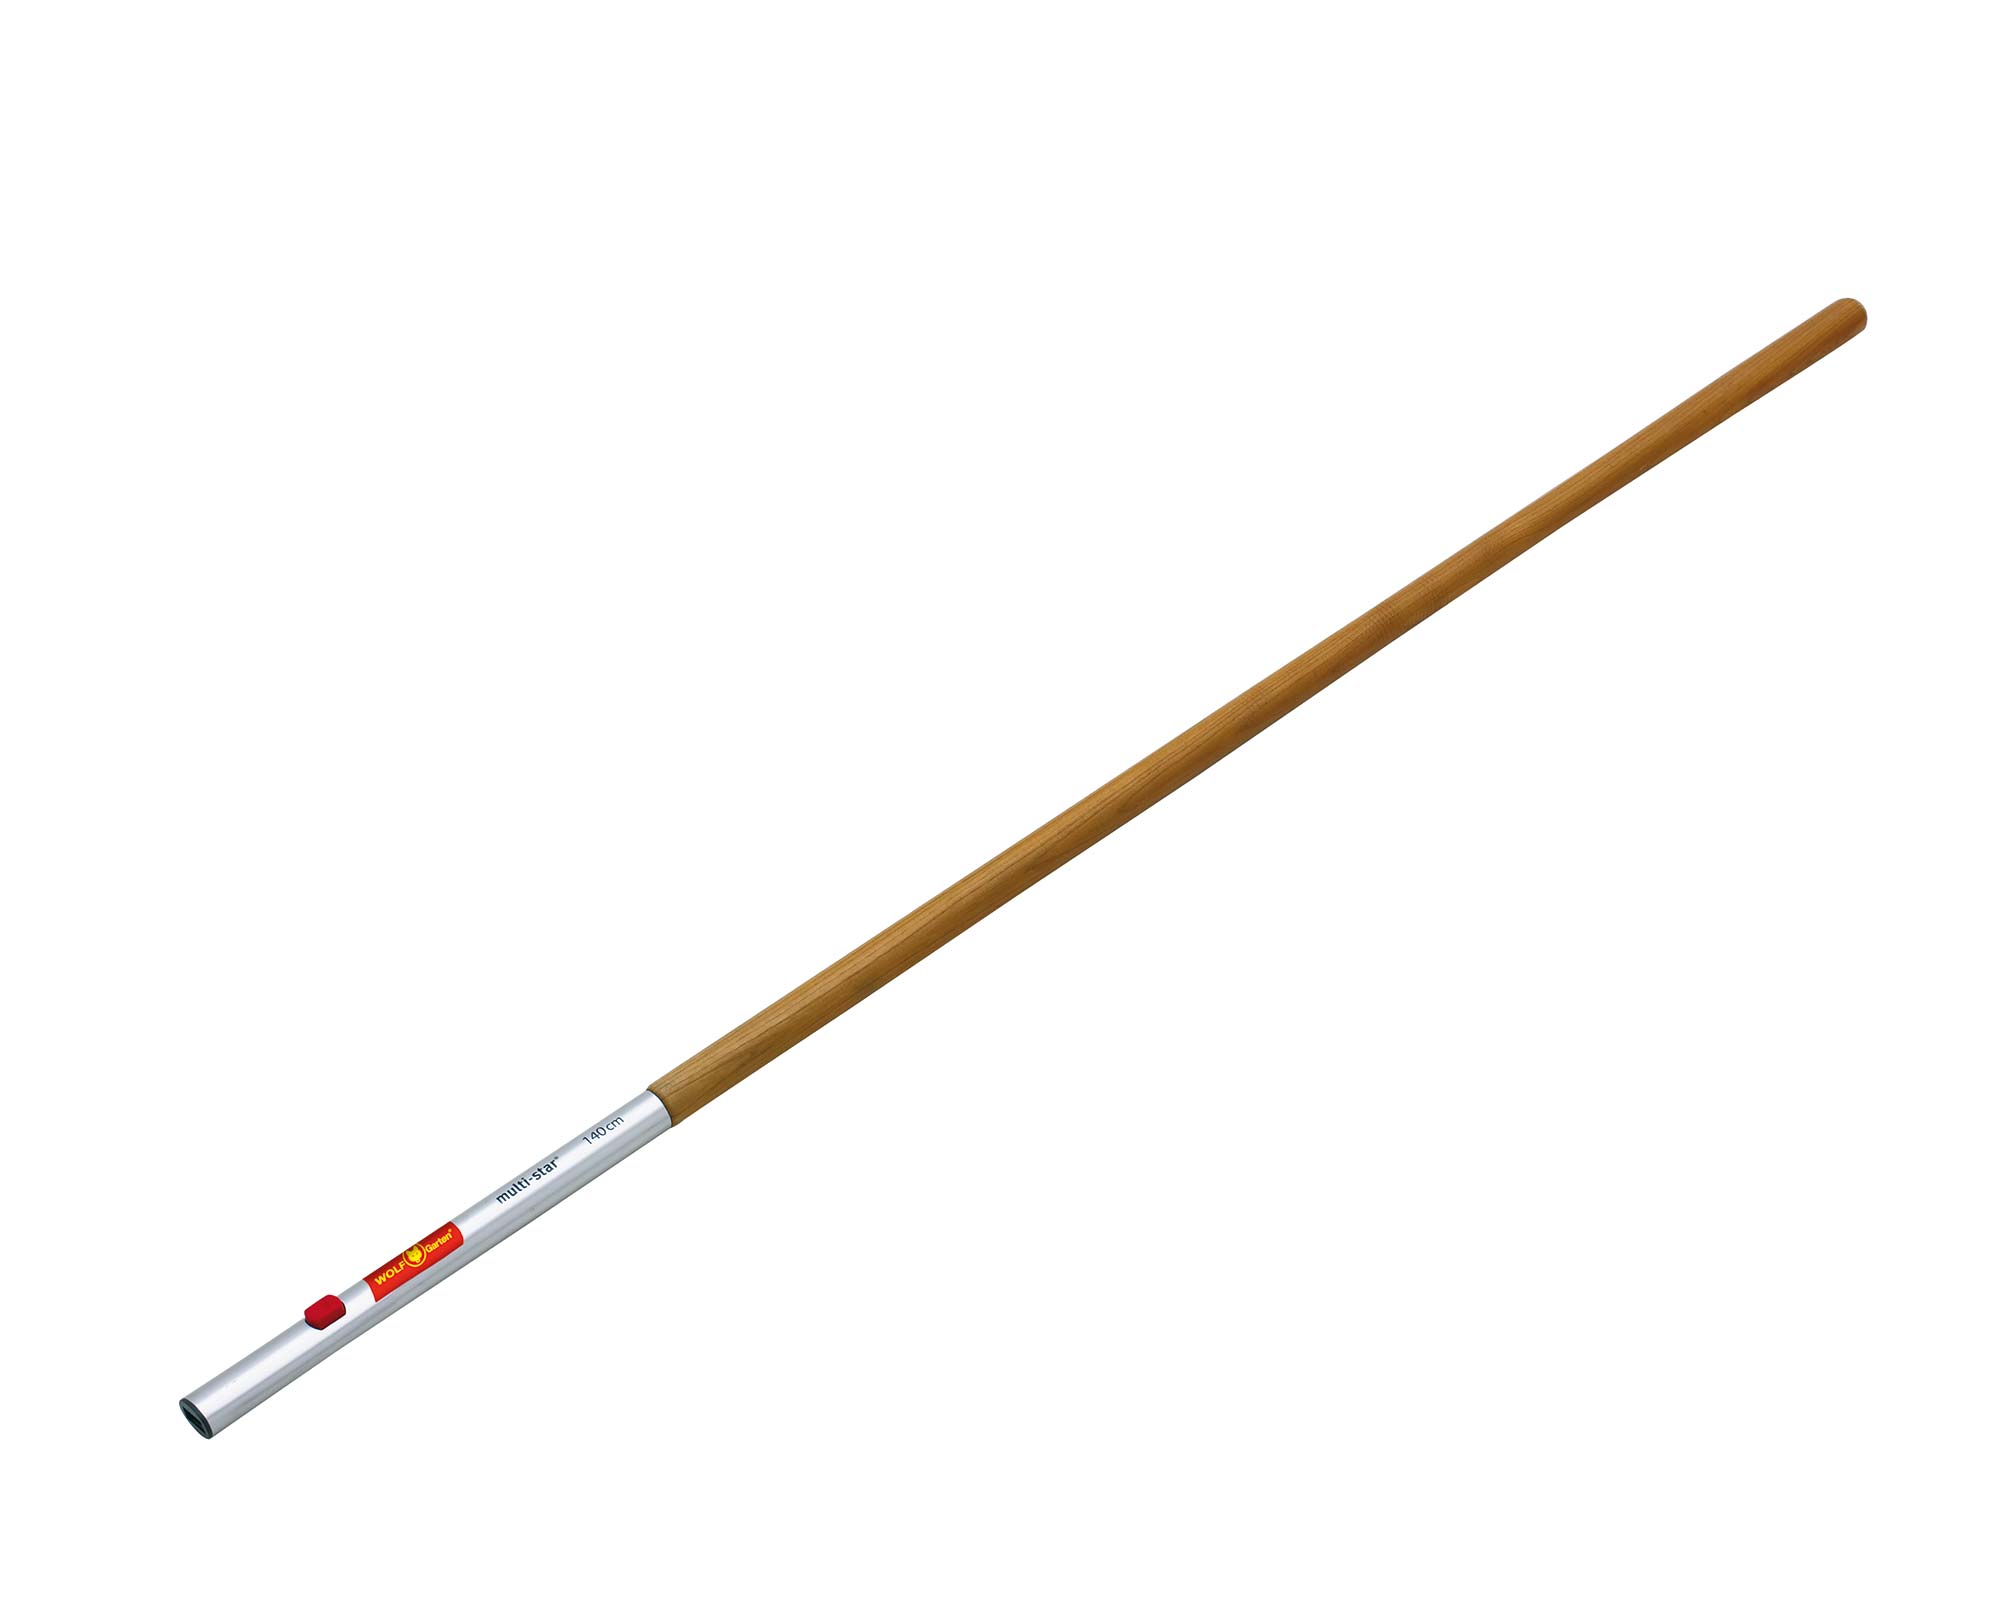 Multi-change hardwood Handle available in three lengths 140cm, 150cm and 170cm.  Recommended handle for small soil rake ZM140